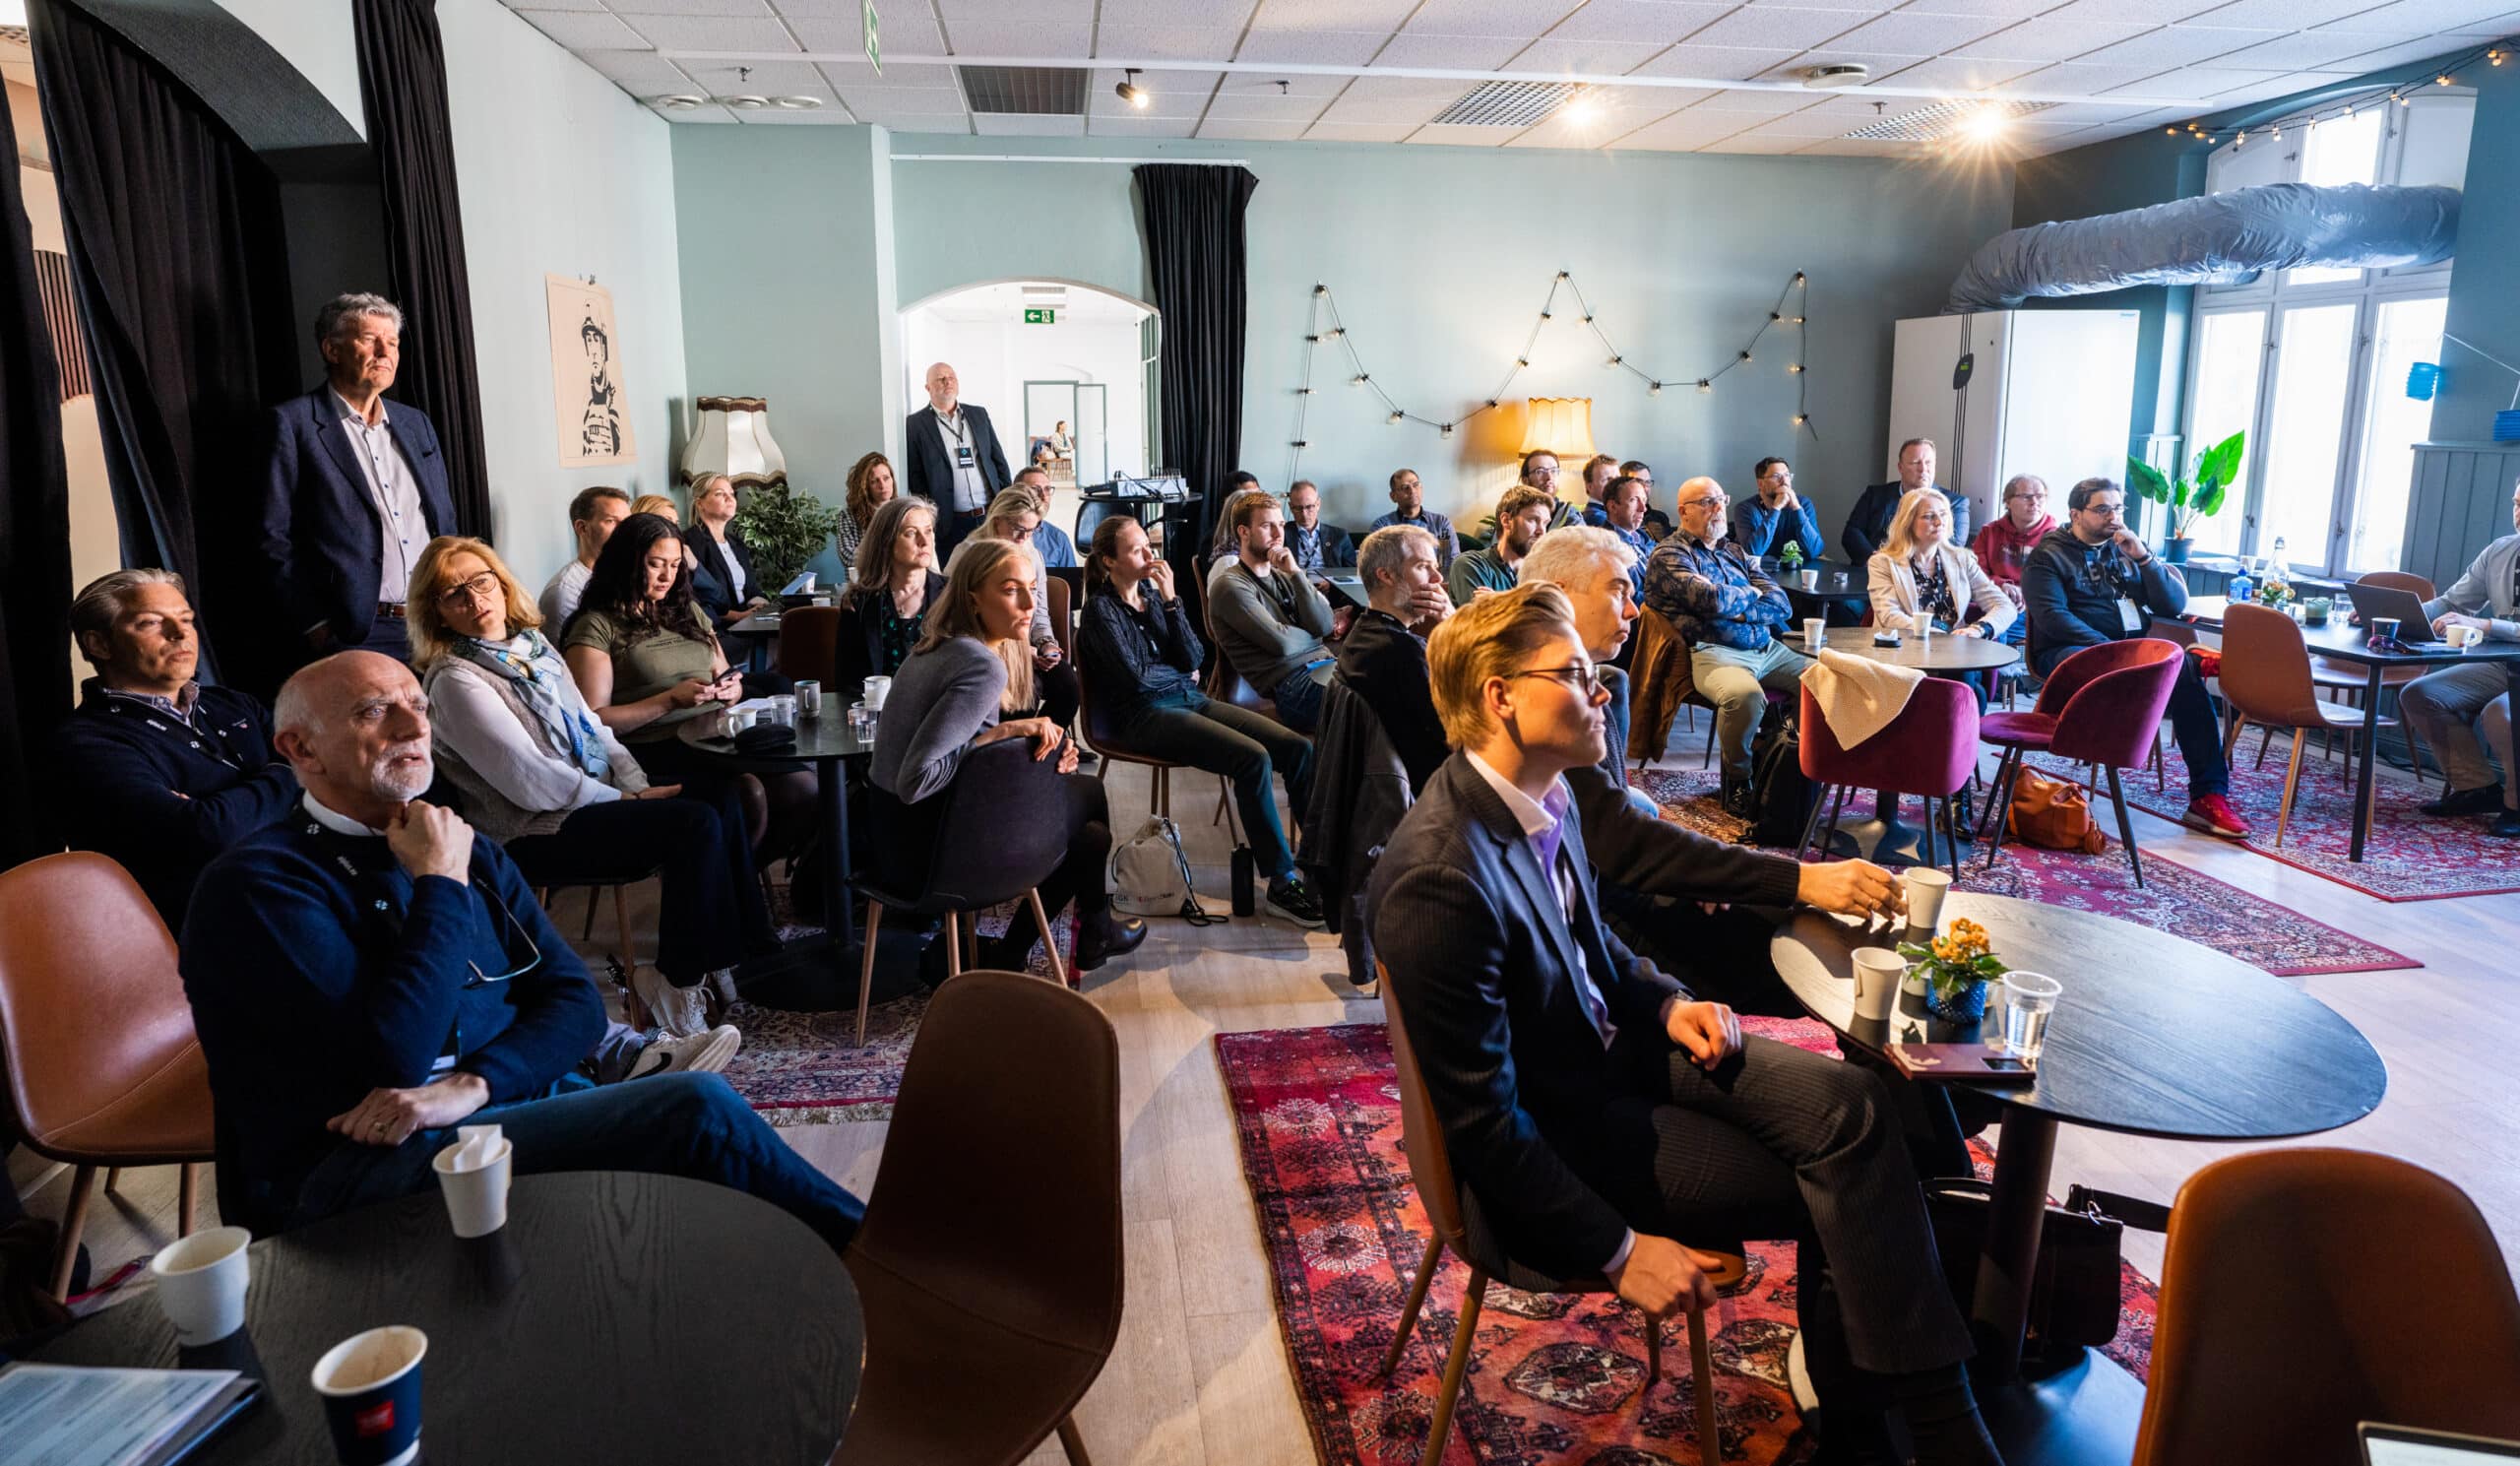 At Kulturhuset Halden two sessions were held. Cluster for Applied AI and eSmart Systems were organizers. PHOTO: Stein Johnsen, ContentVideo